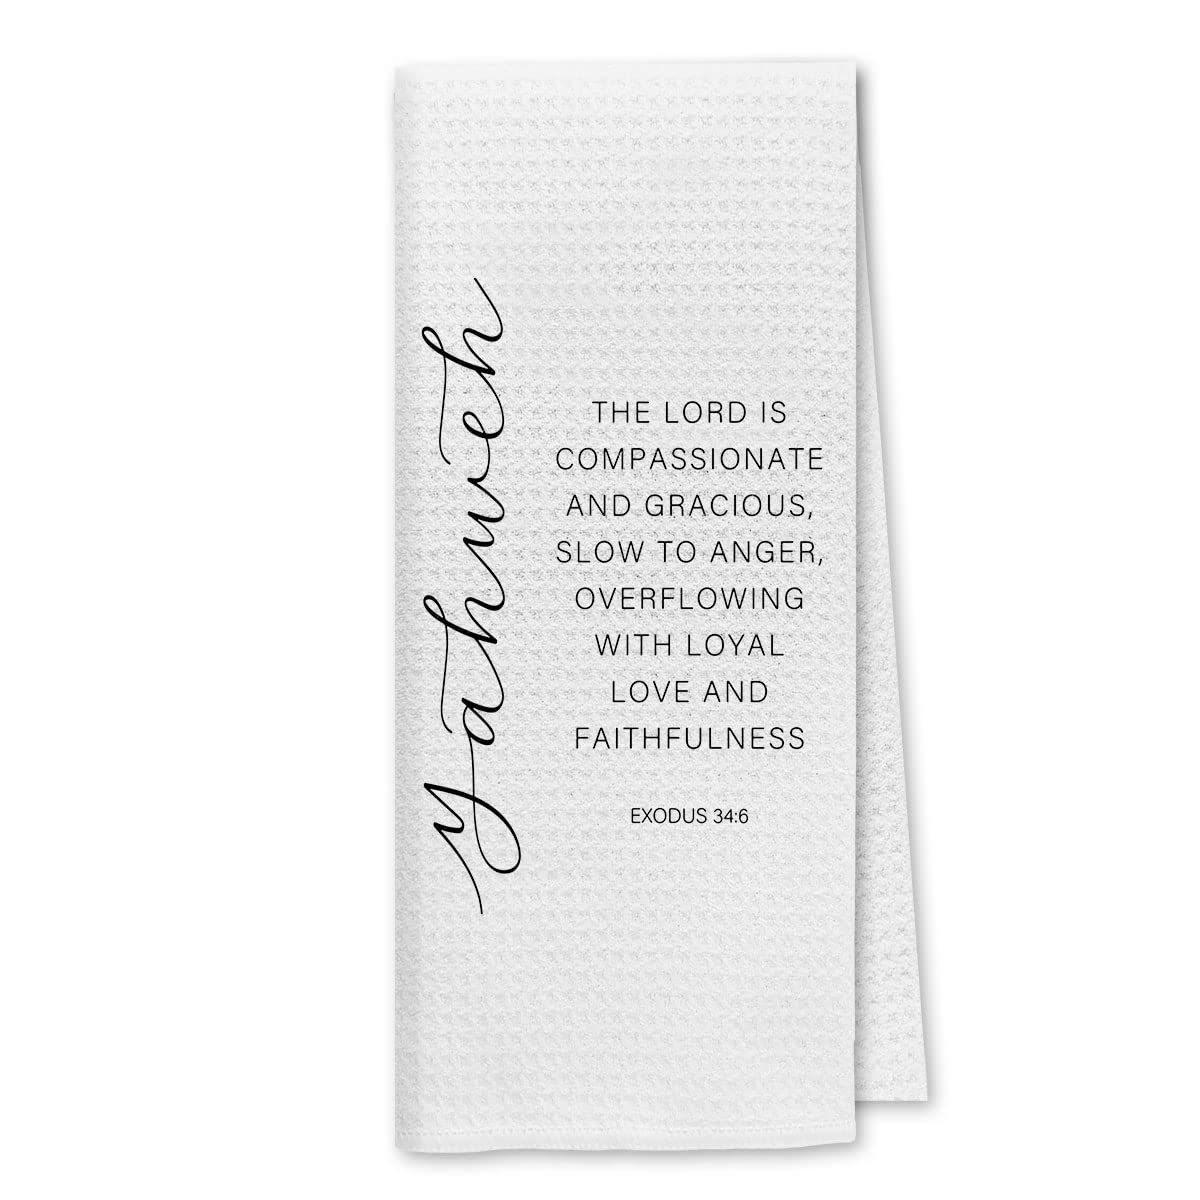 Dibor Christian Kitchen Towels Dish Towels Dishcloth,Bible Verse Scripture Exodus 34:6 Decorative Absorbent Drying Cloth Hand Towels Tea Towels for Bathroom Kitchen,Christian Girls Women Gifts